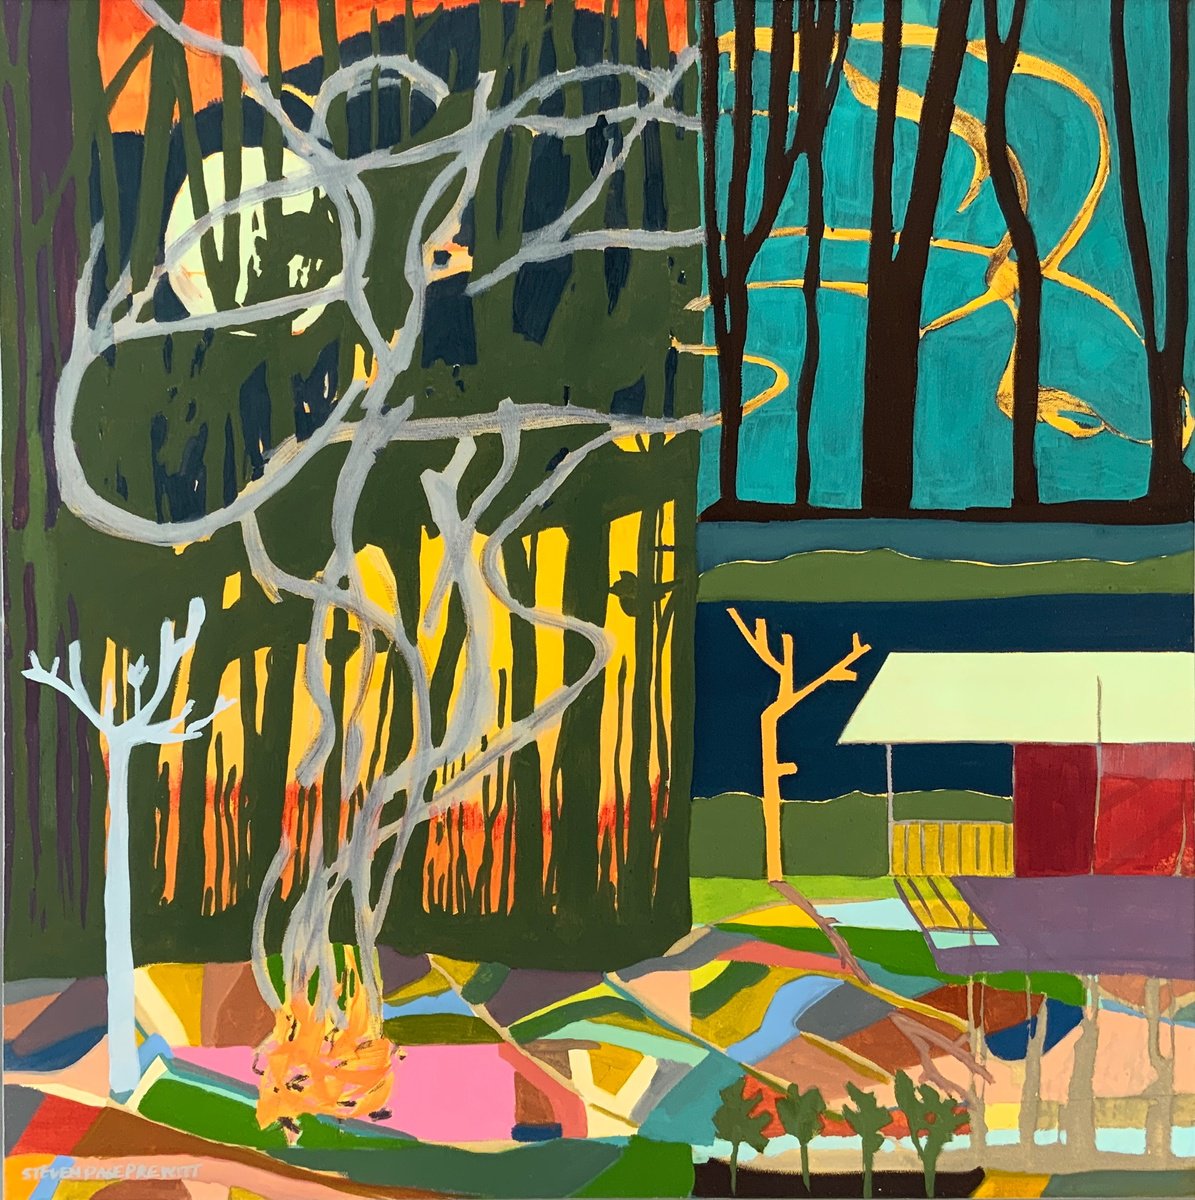 Another One About a Full Moon, a Fire Pit and Fire Flies with Diebenkorn Ingleside Trees by Steven Page Prewitt